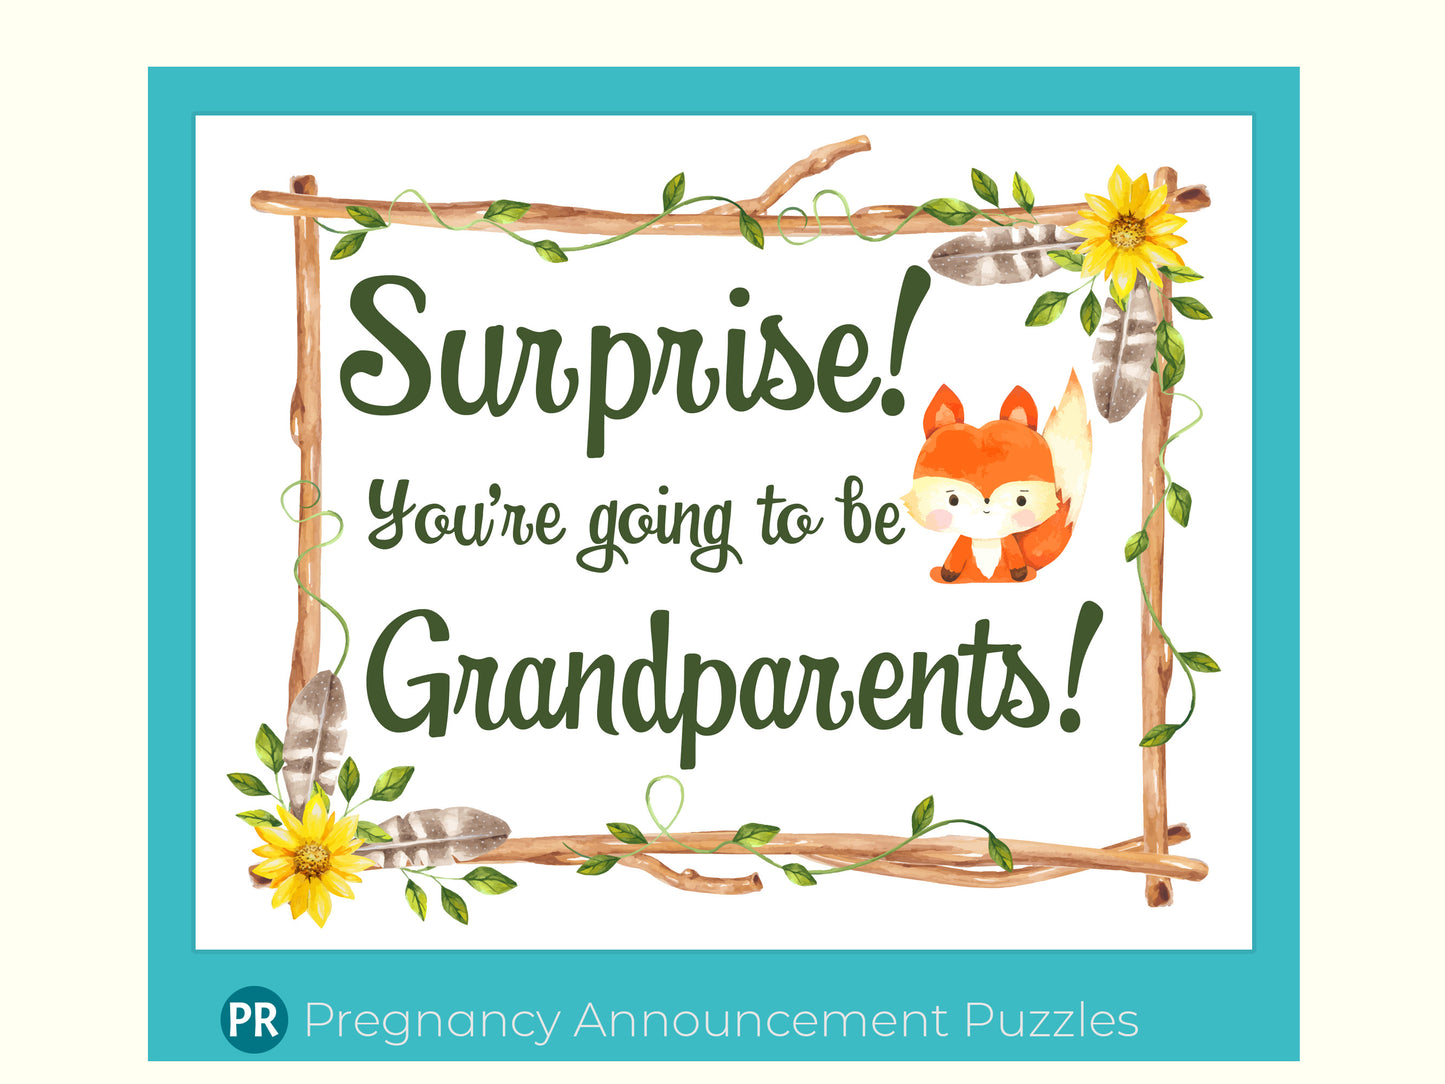 Sweet Baby Fox Pregnancy Puzzle - Add Your Message, Special Pregnancy Announcement, Tailored Expecting Gift